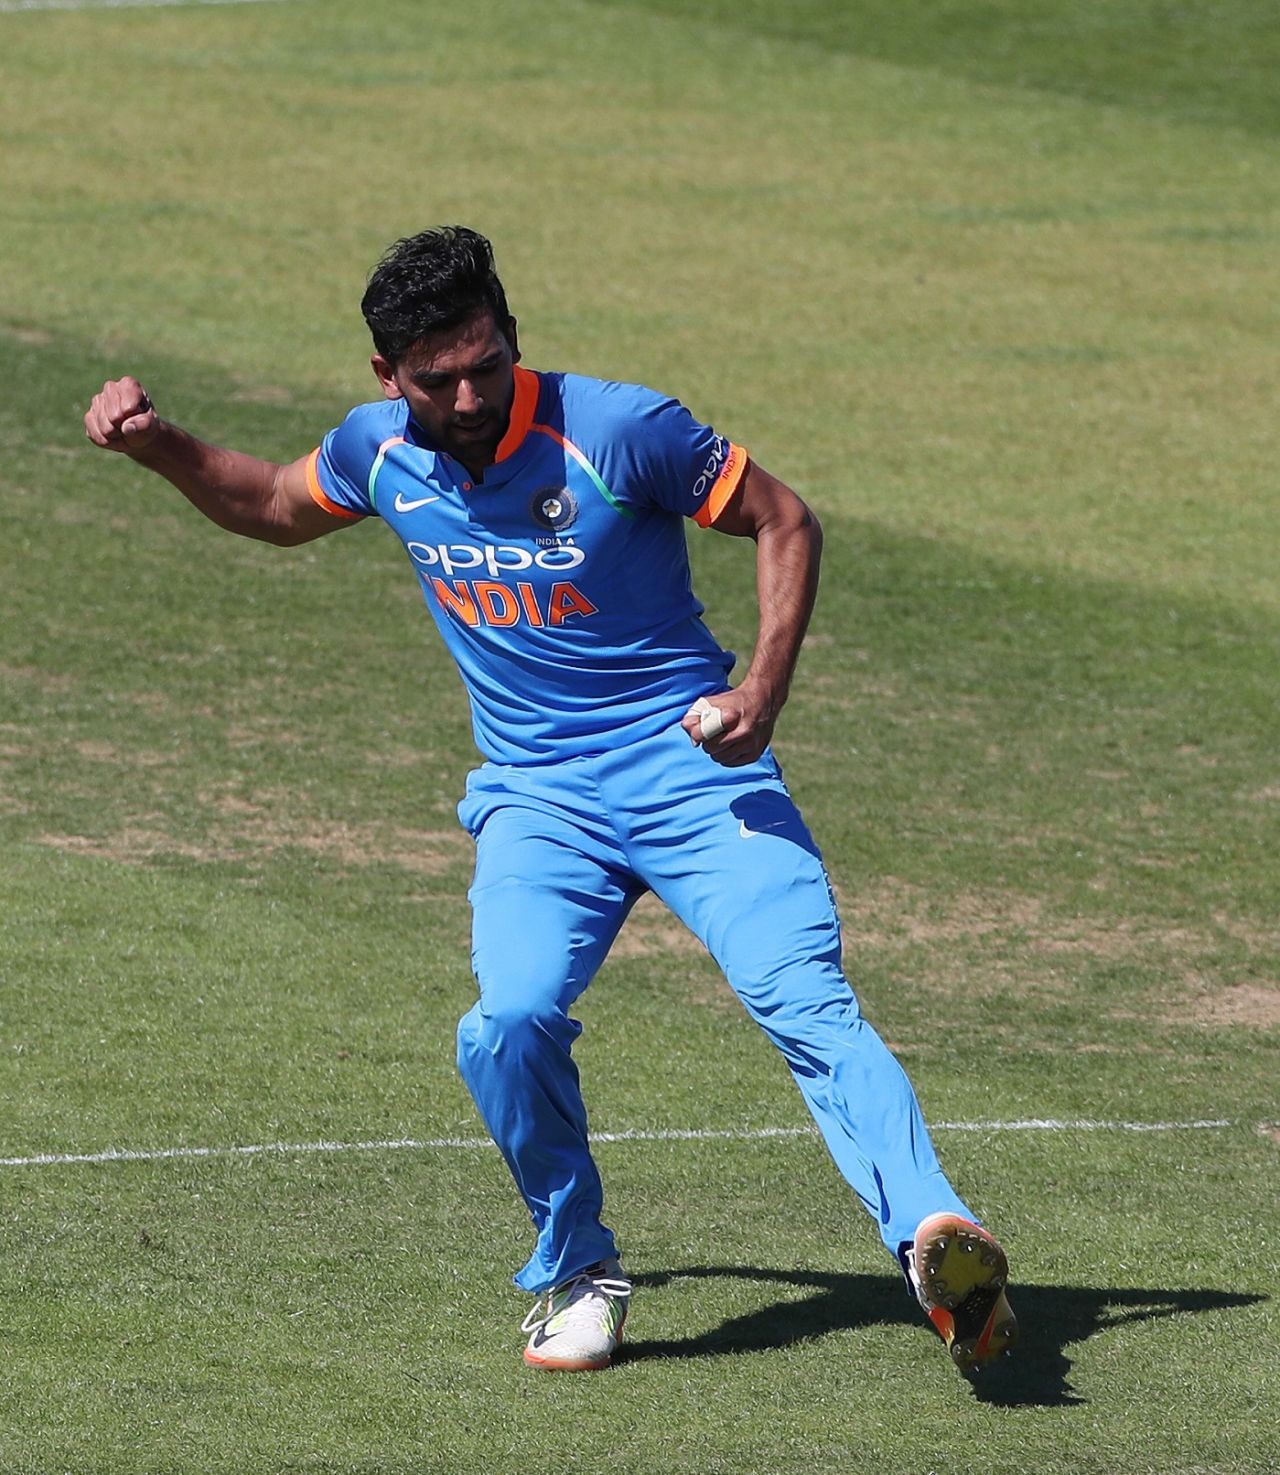 Deepak Chahar has enjoyed rich returns on India A's tour of England, India A v West Indies A, June 29, 2018